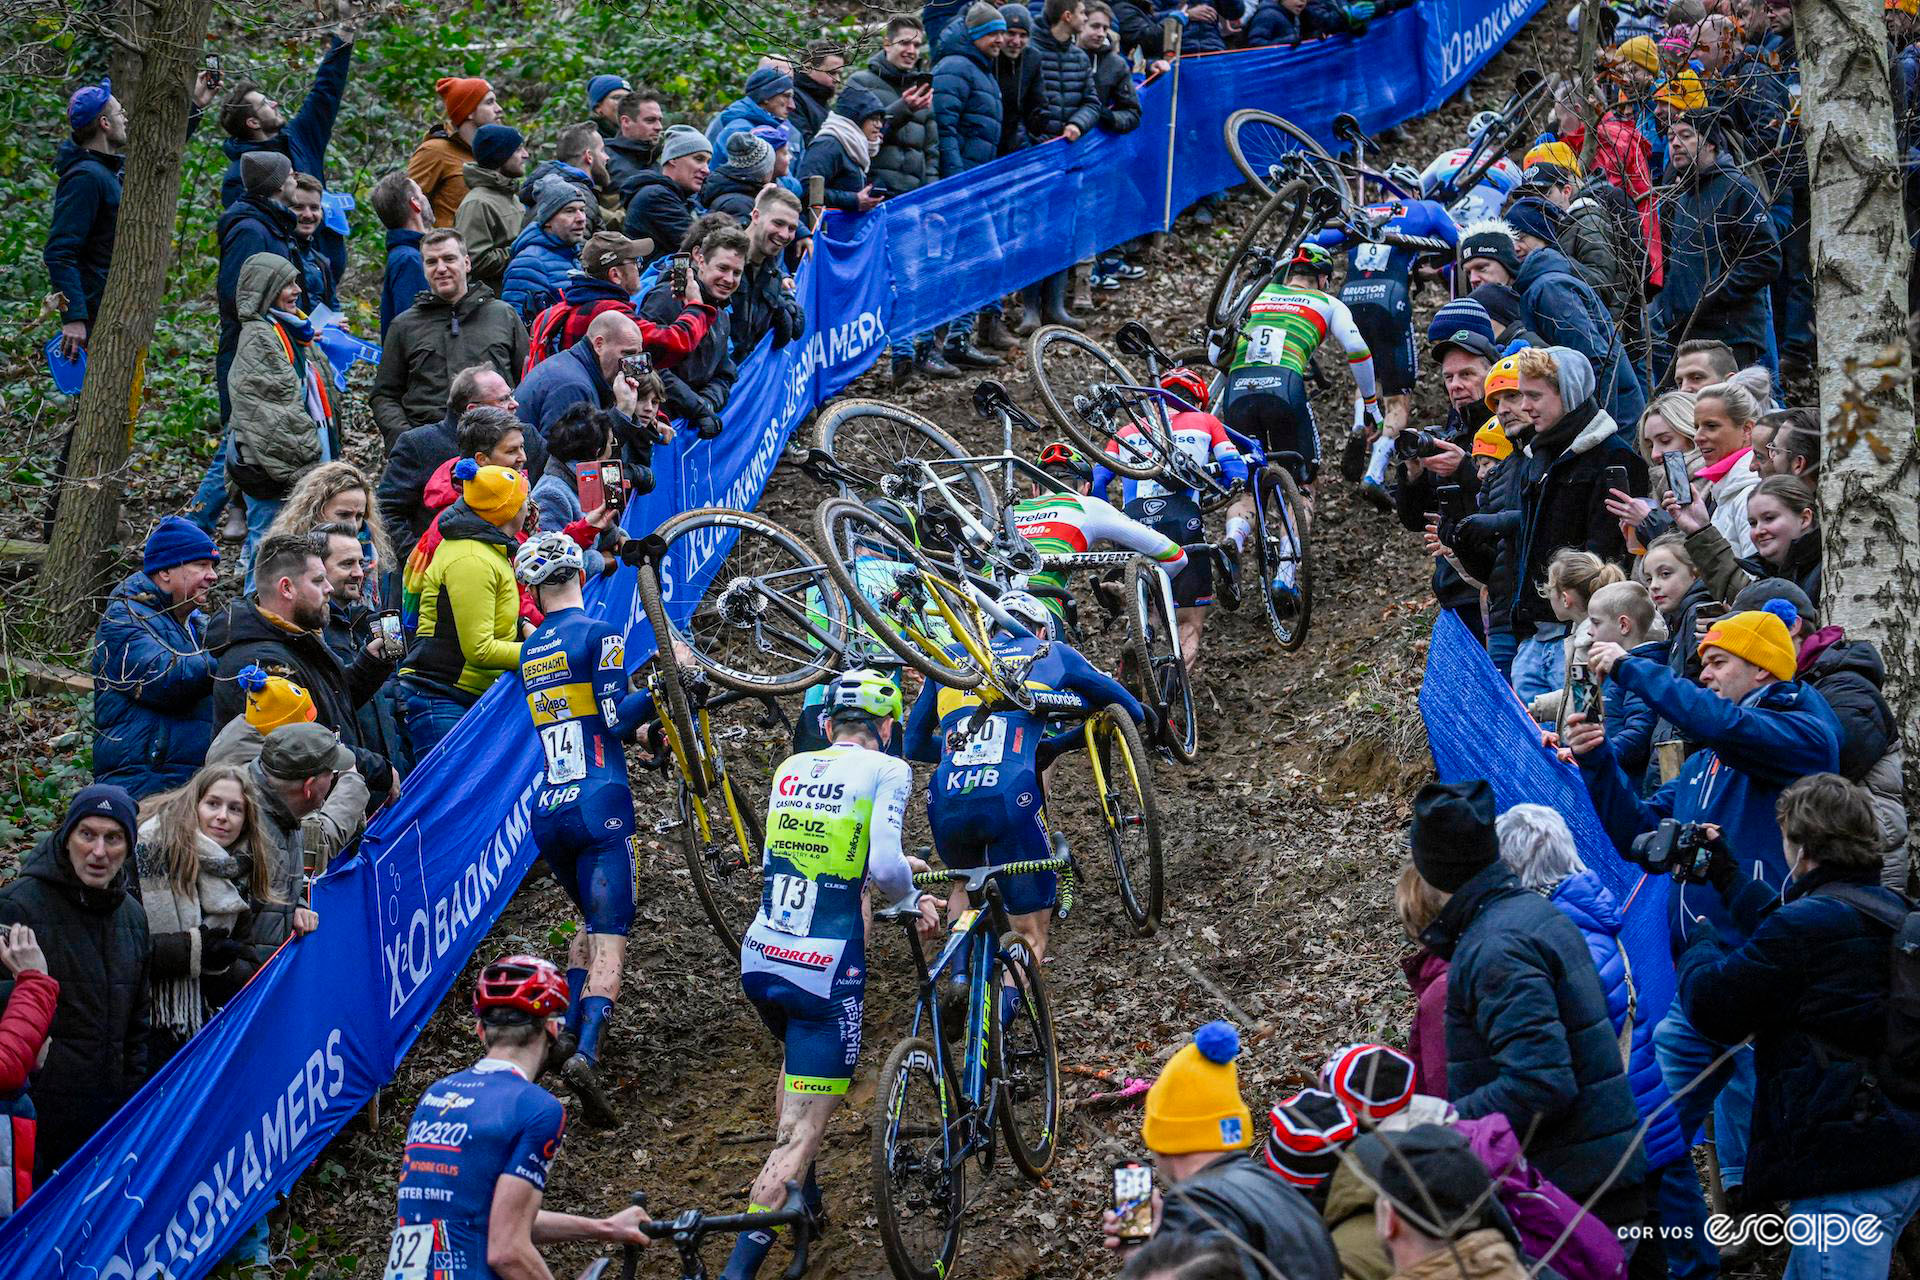 The elite men run up the steep climb through the woods during X2O Trofee Herentals.